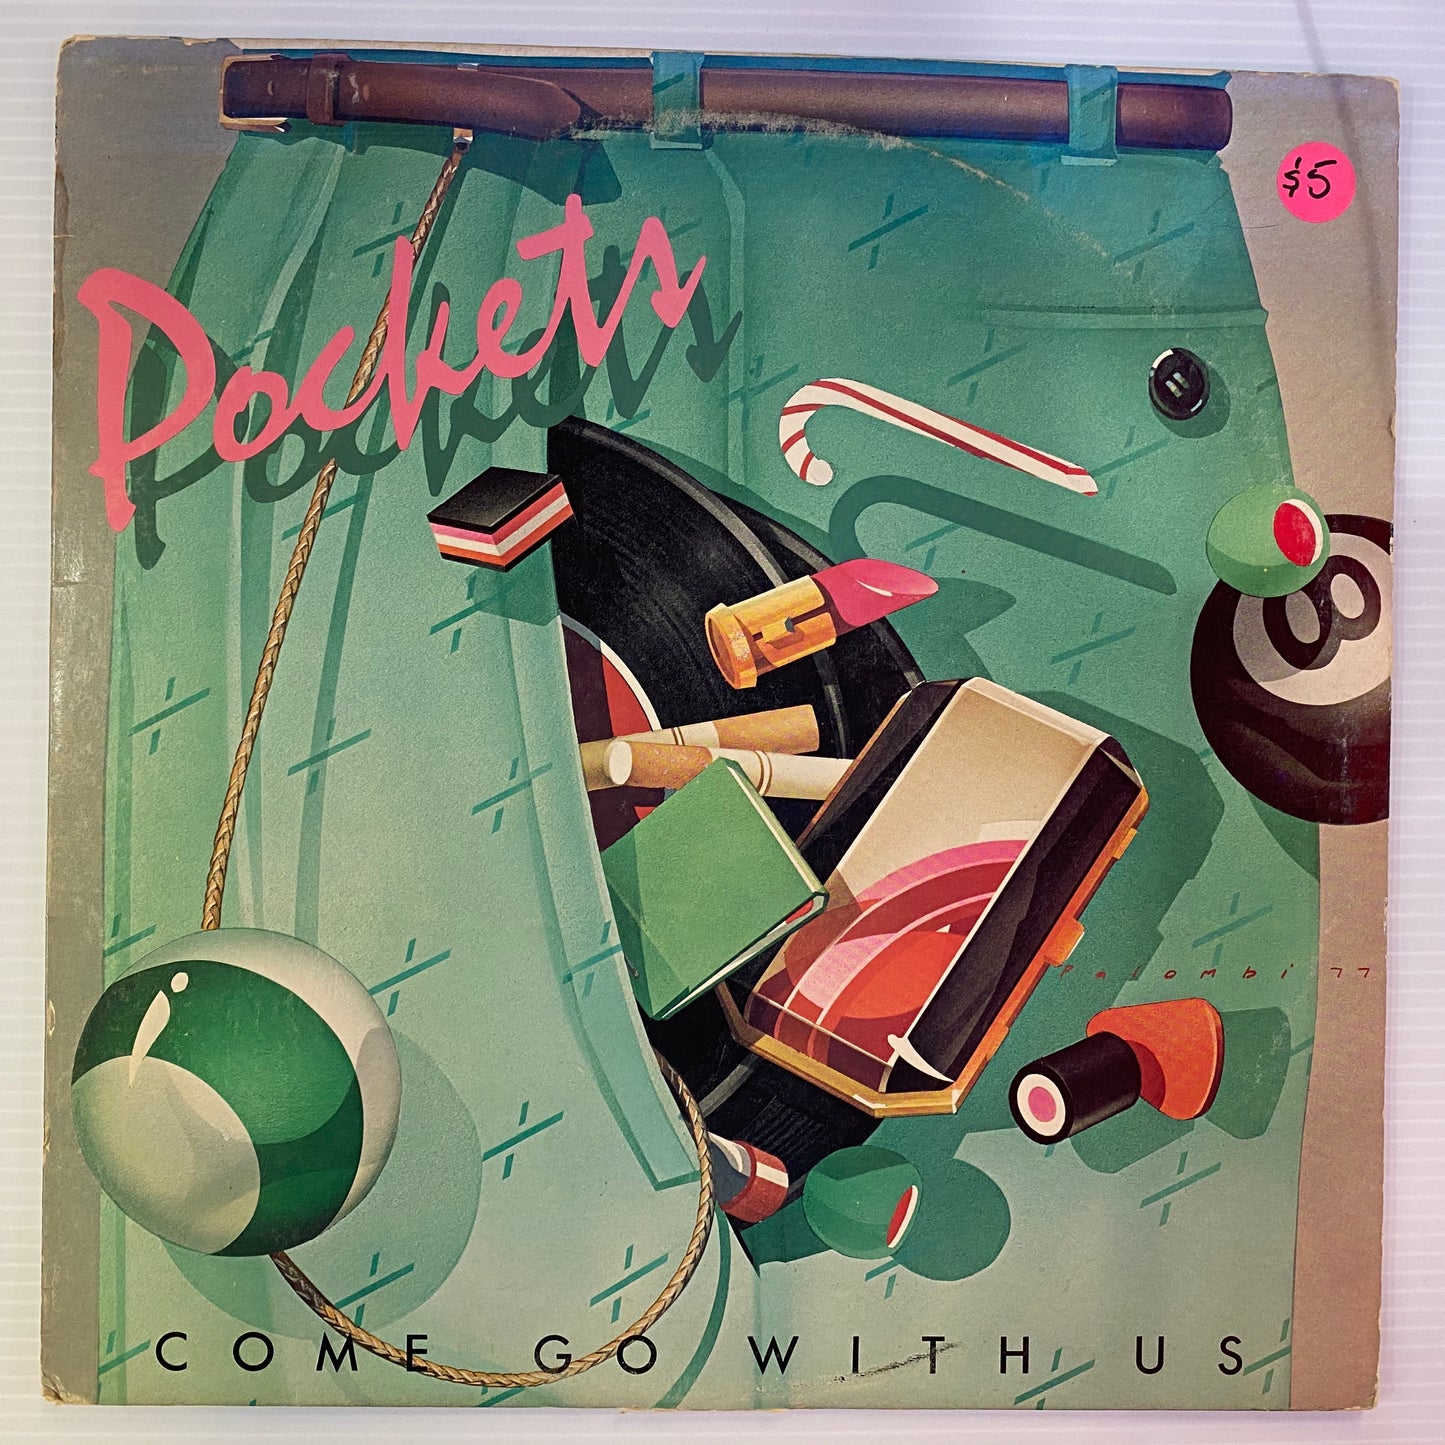 Pockets-Come Go With Us (Vinyl)